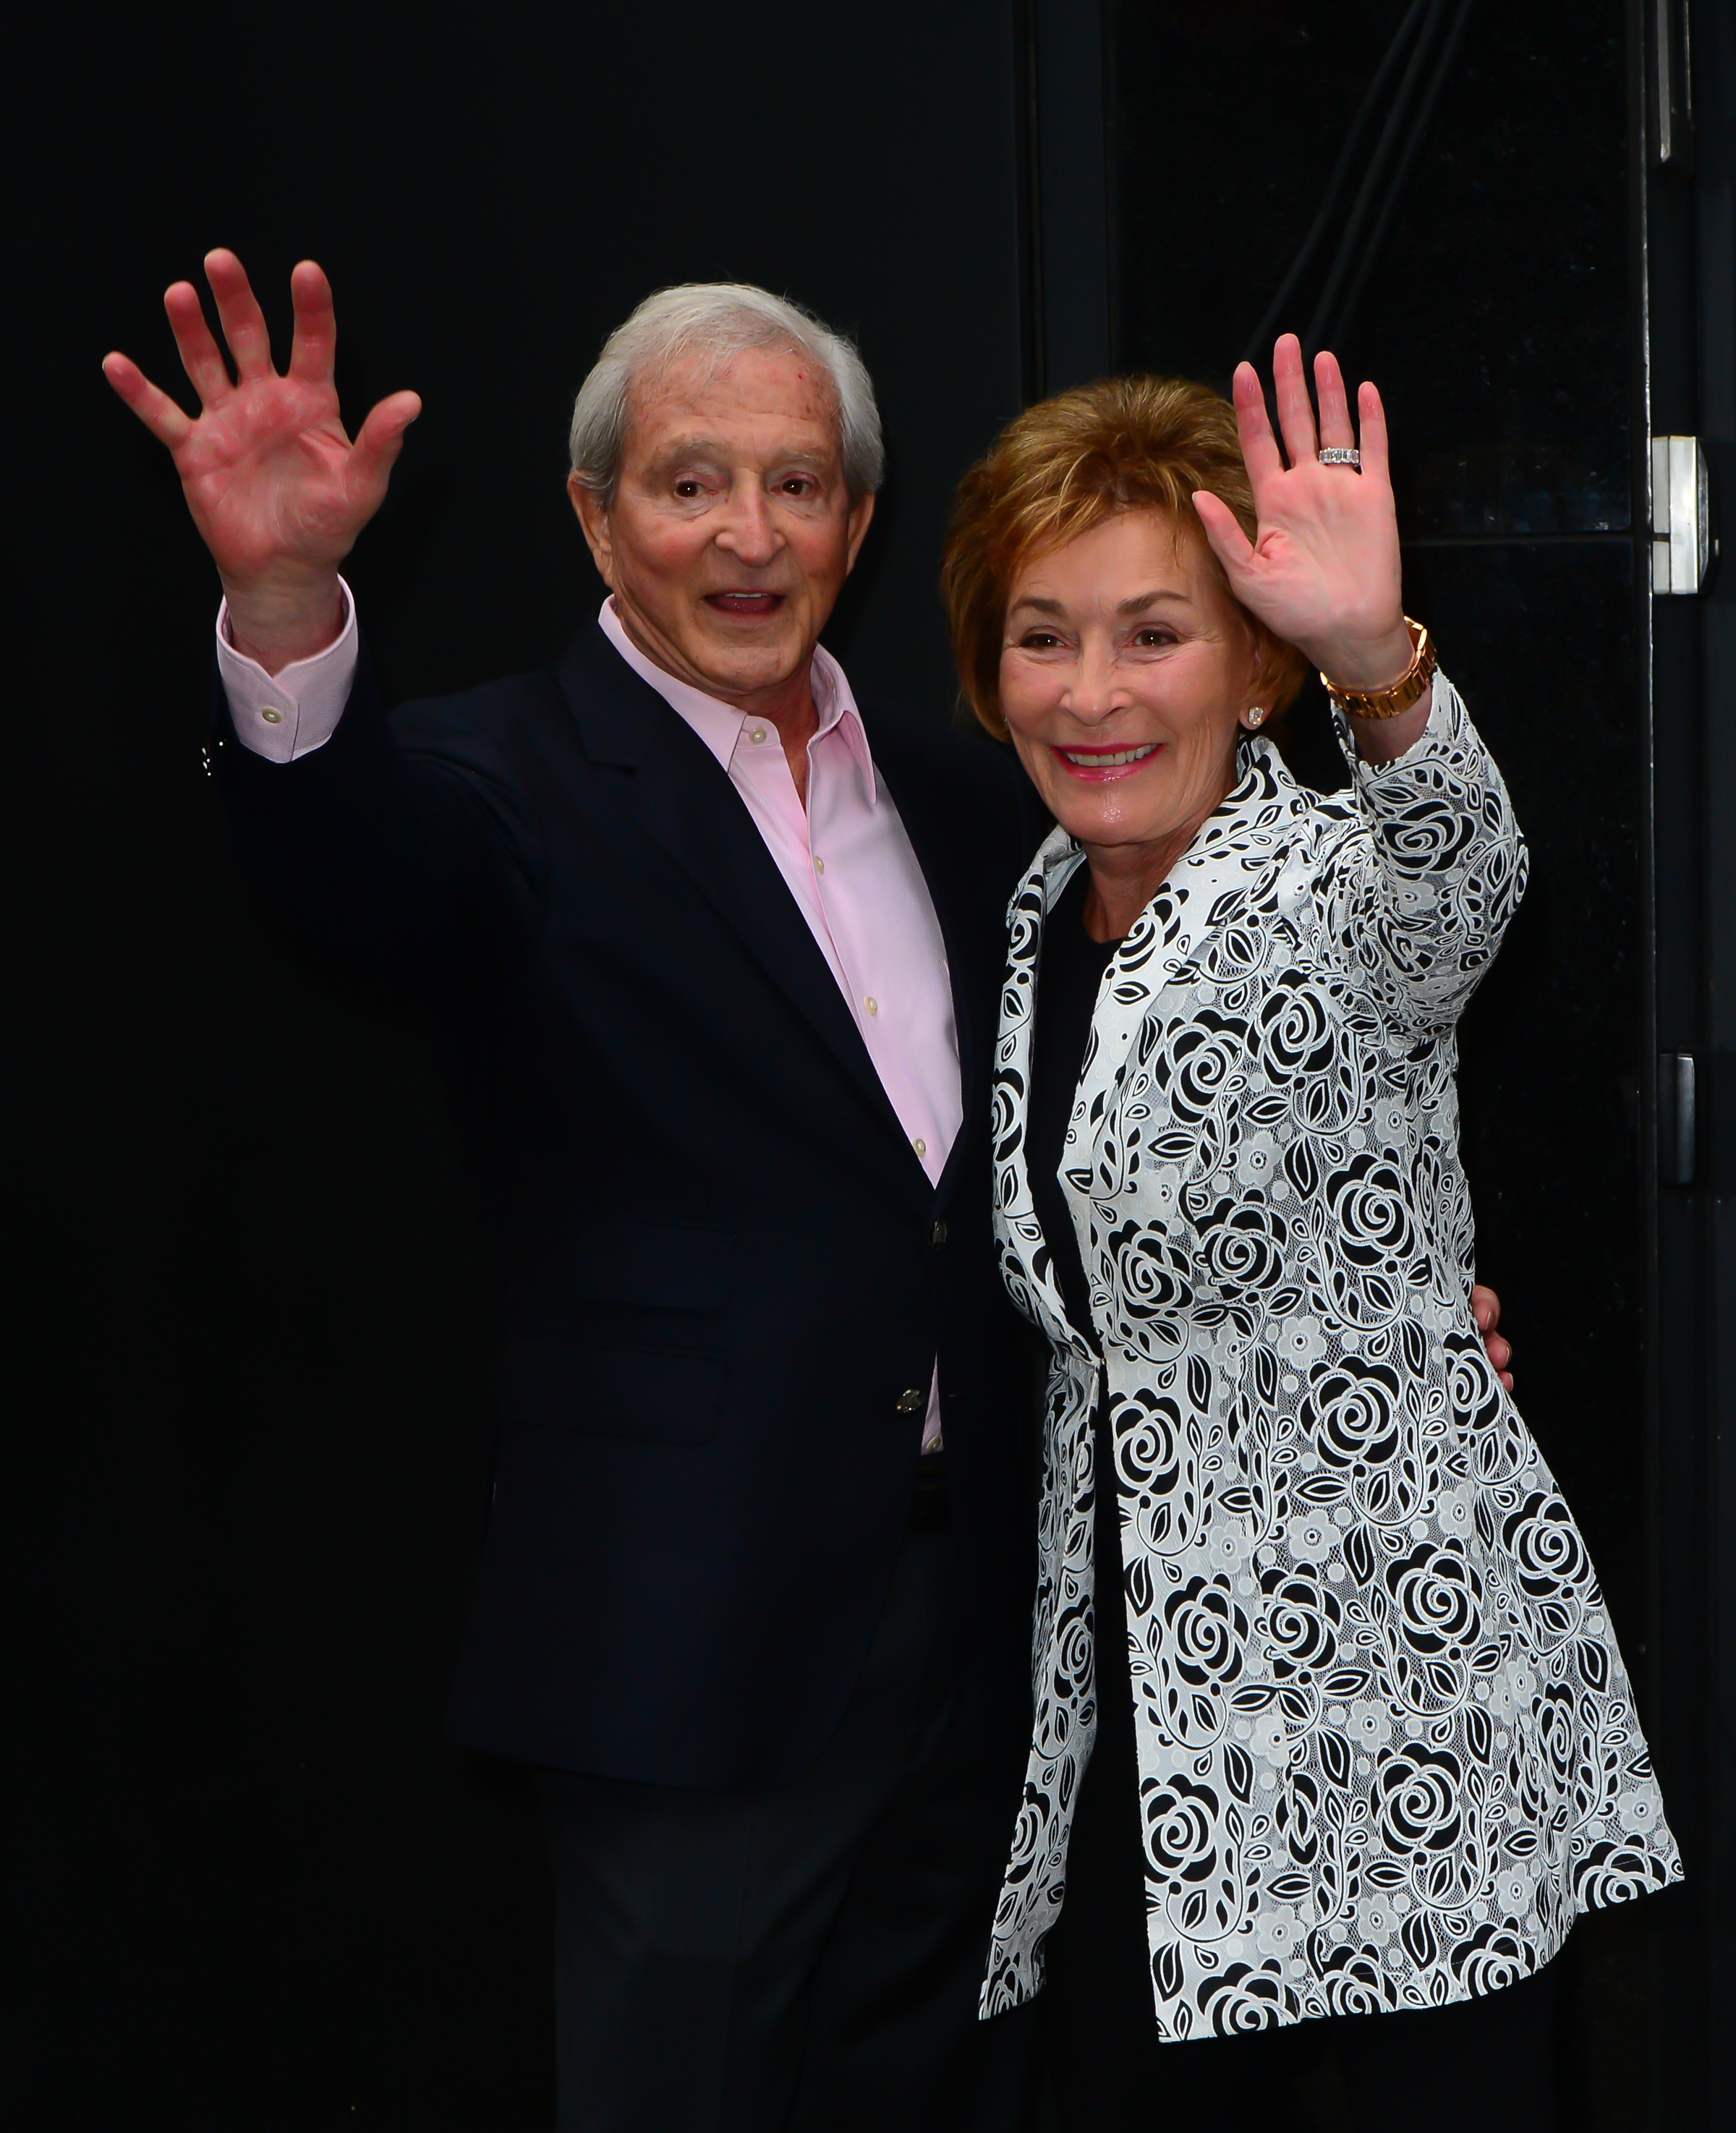 Jerry and Judy Sheindlin visit 'Good Morning America' in New York City on October 7, 2015 | Source: Getty Images